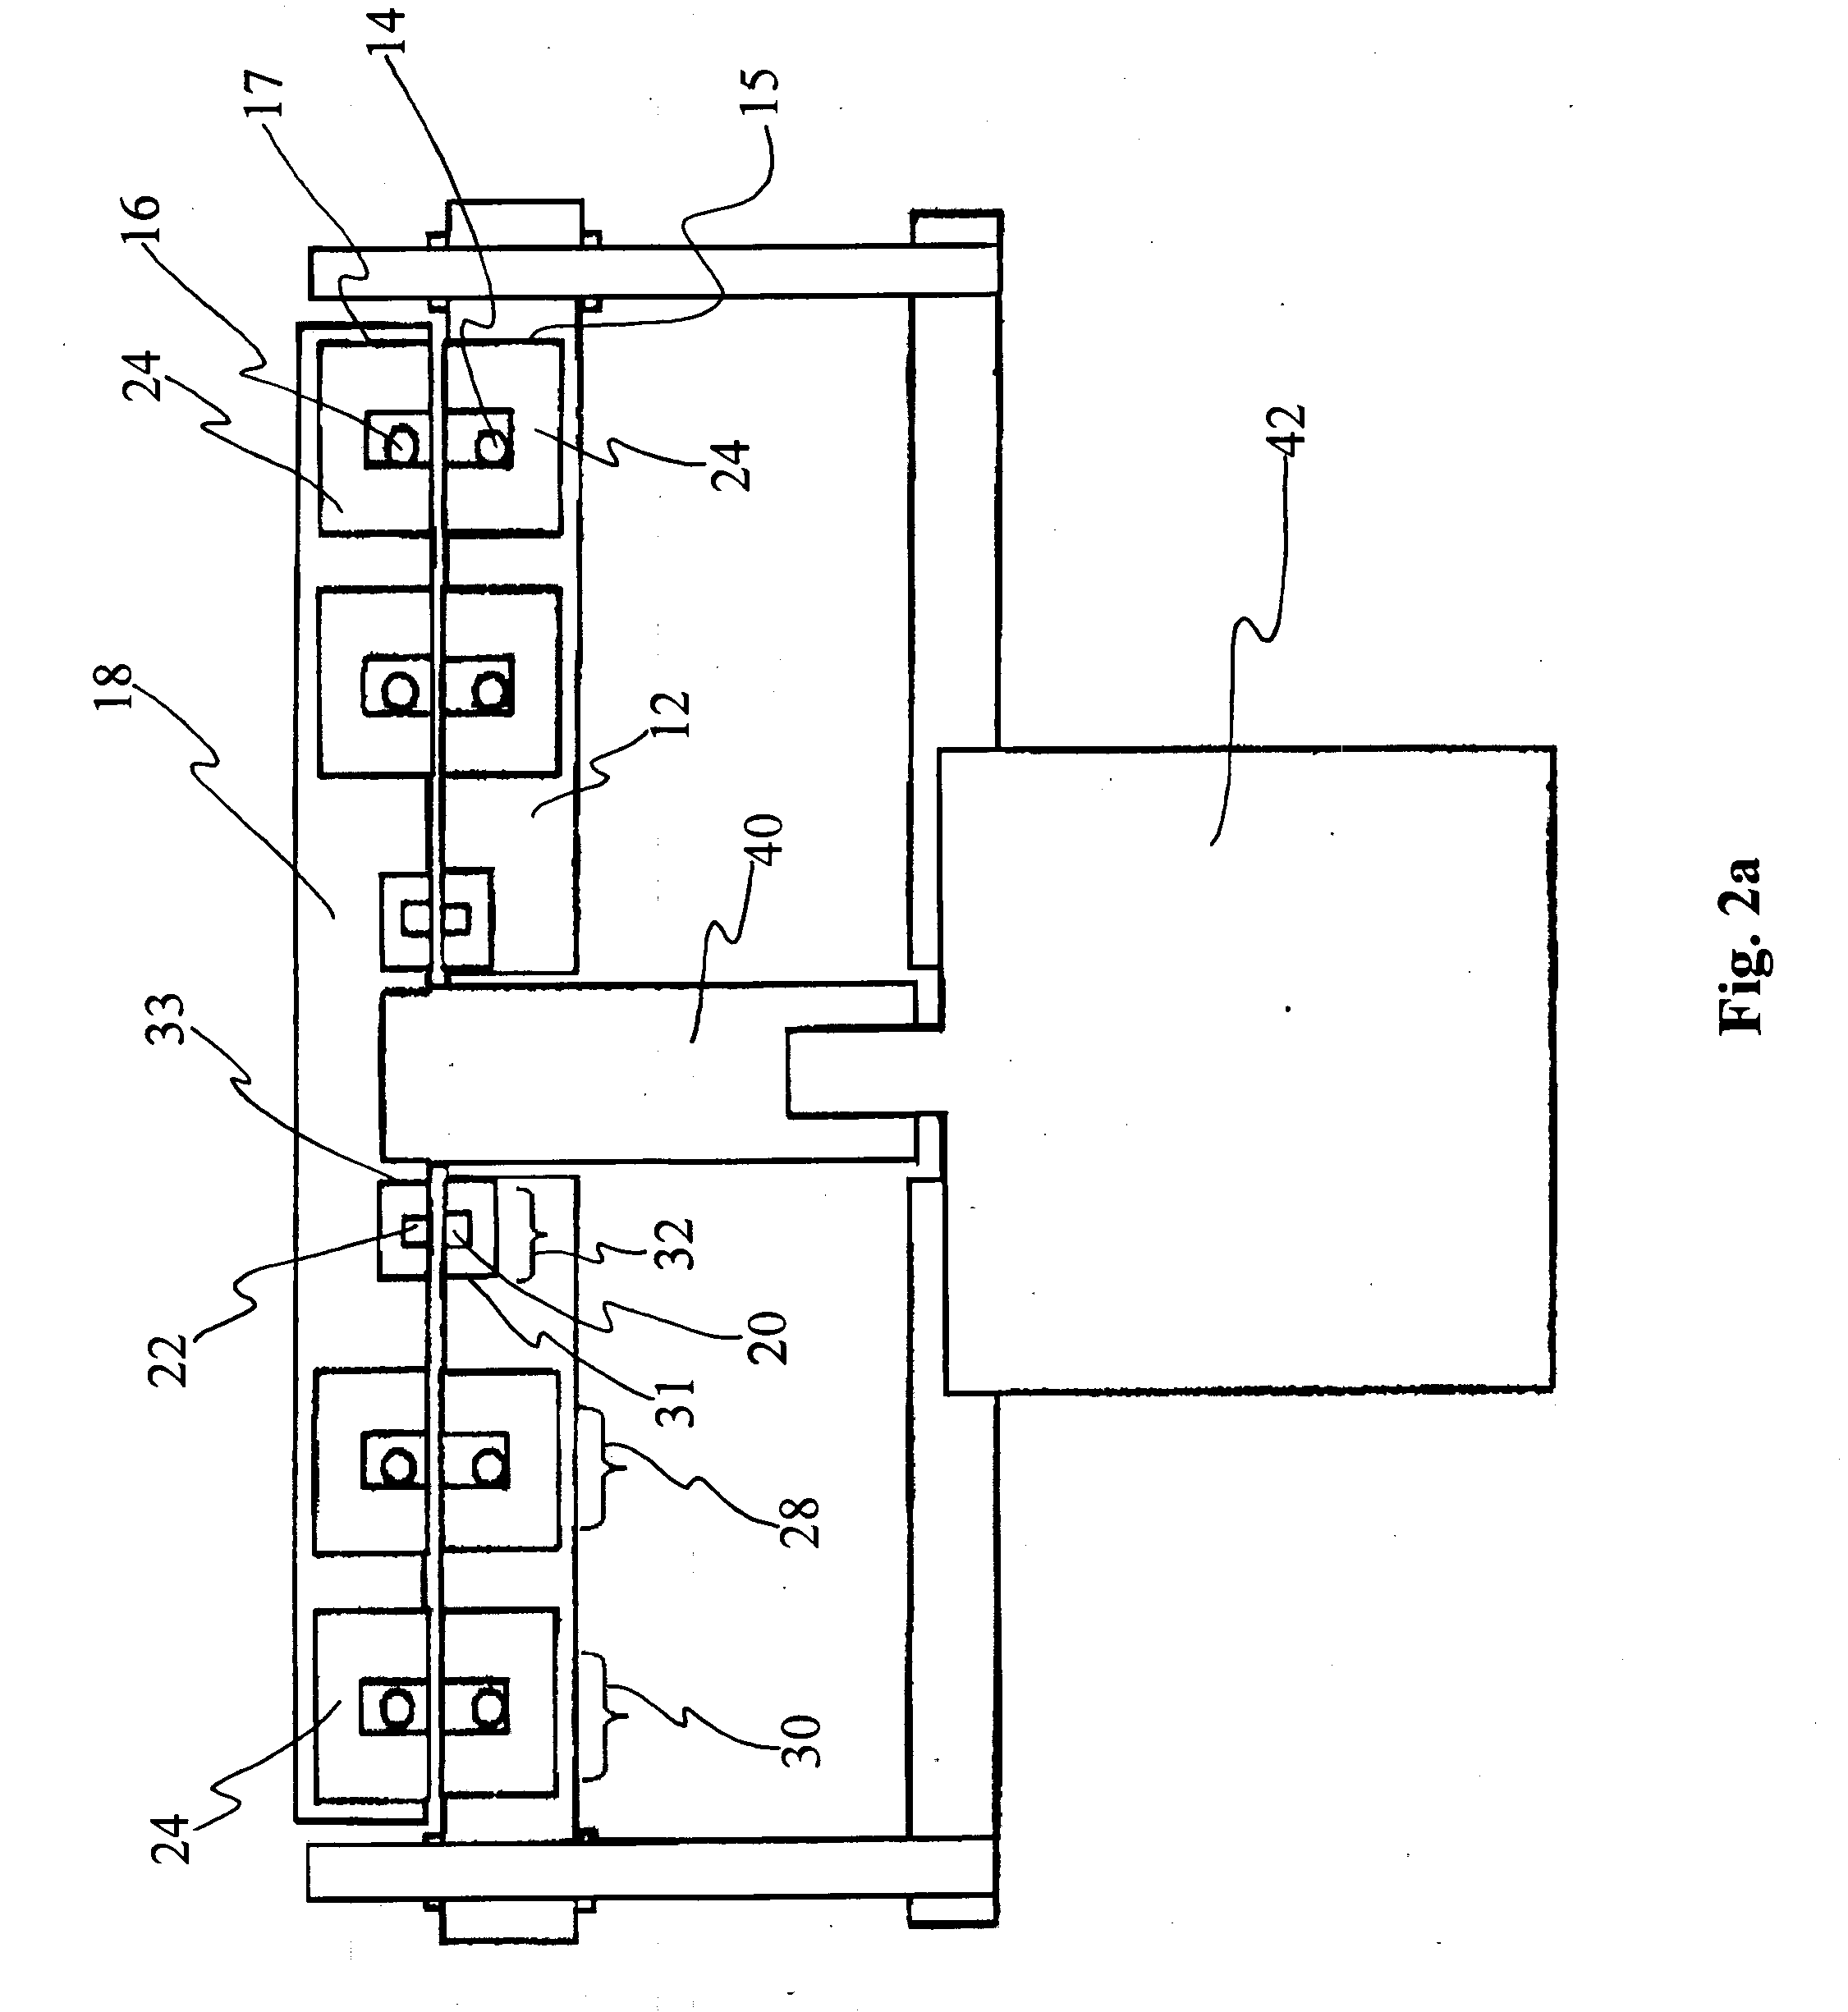 Contact-less power and signal transmission device for a high power level transformer